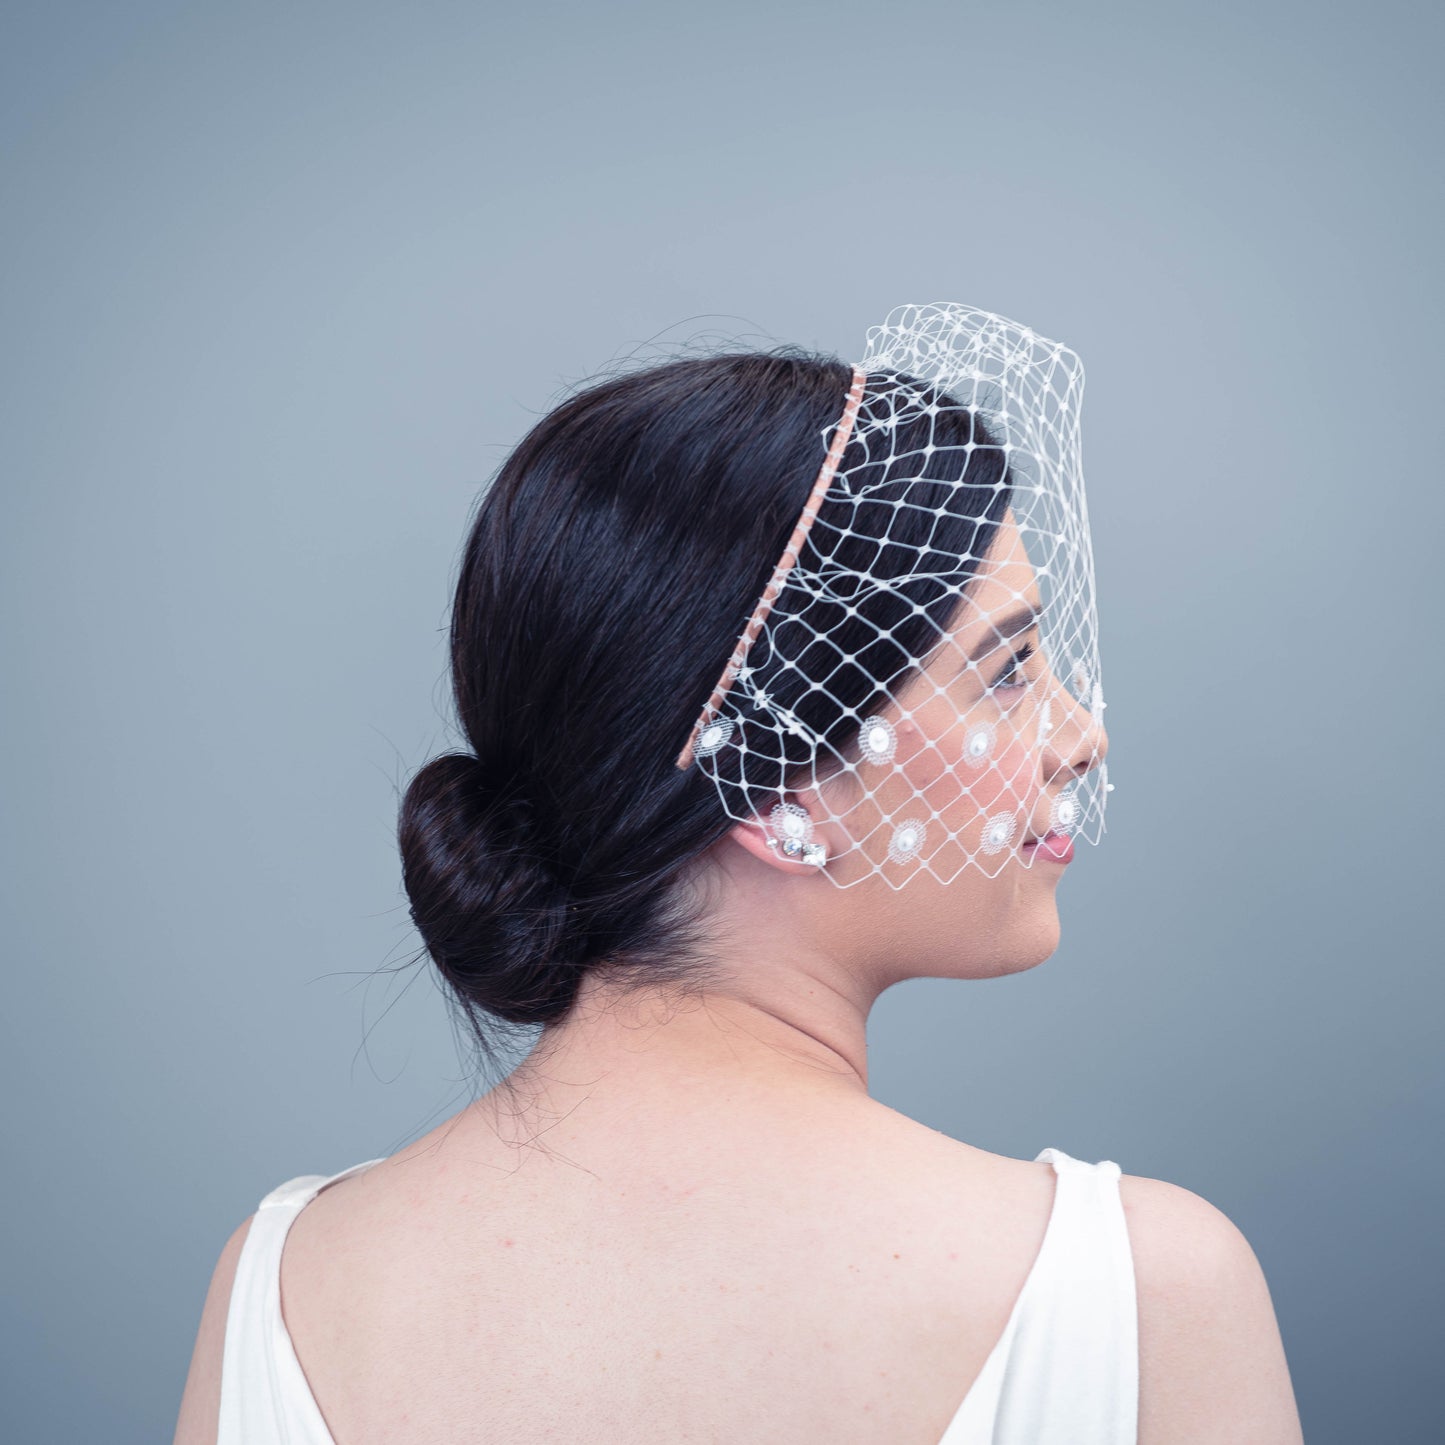 All of Me bridal birdcage veil on headband with white sequin polka dots